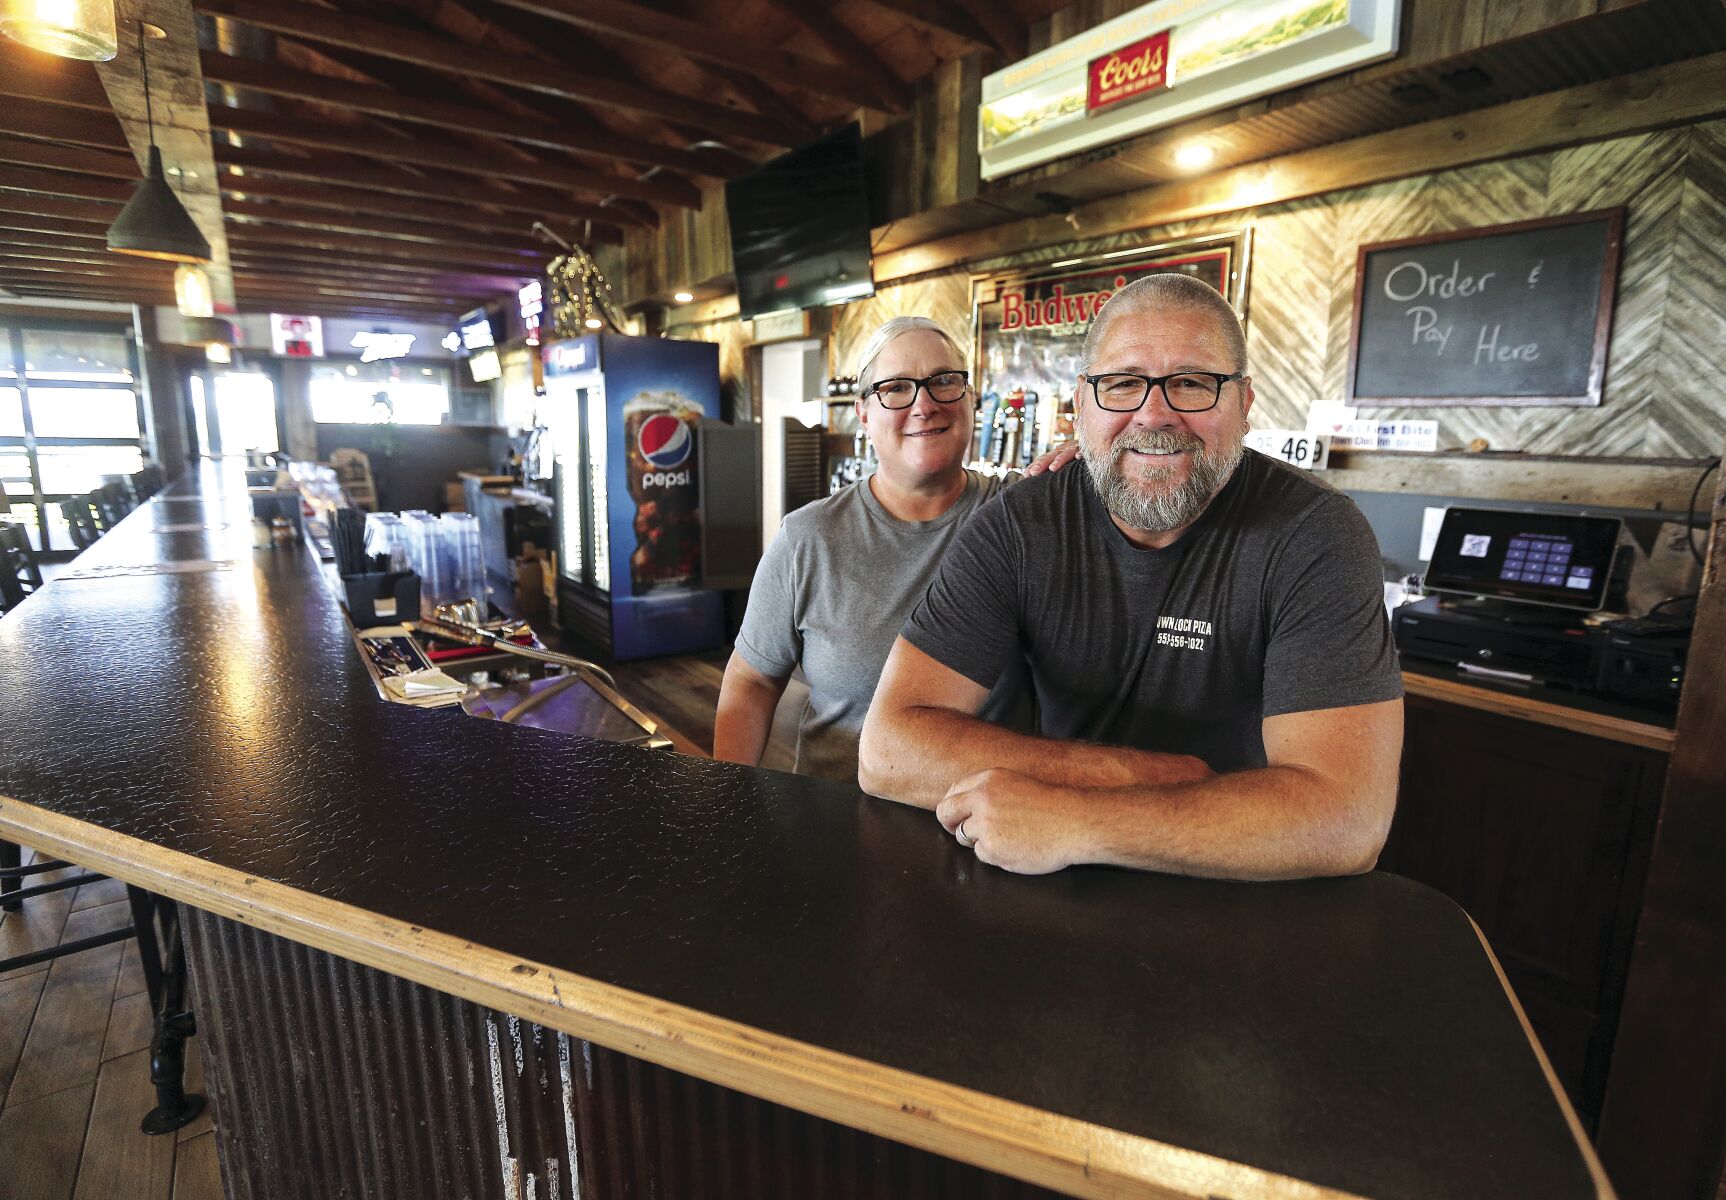 Scott and Irene Nelson are the owners of Town Clock Pizza in Centralia, Iowa.    PHOTO CREDIT: Dave Kettering